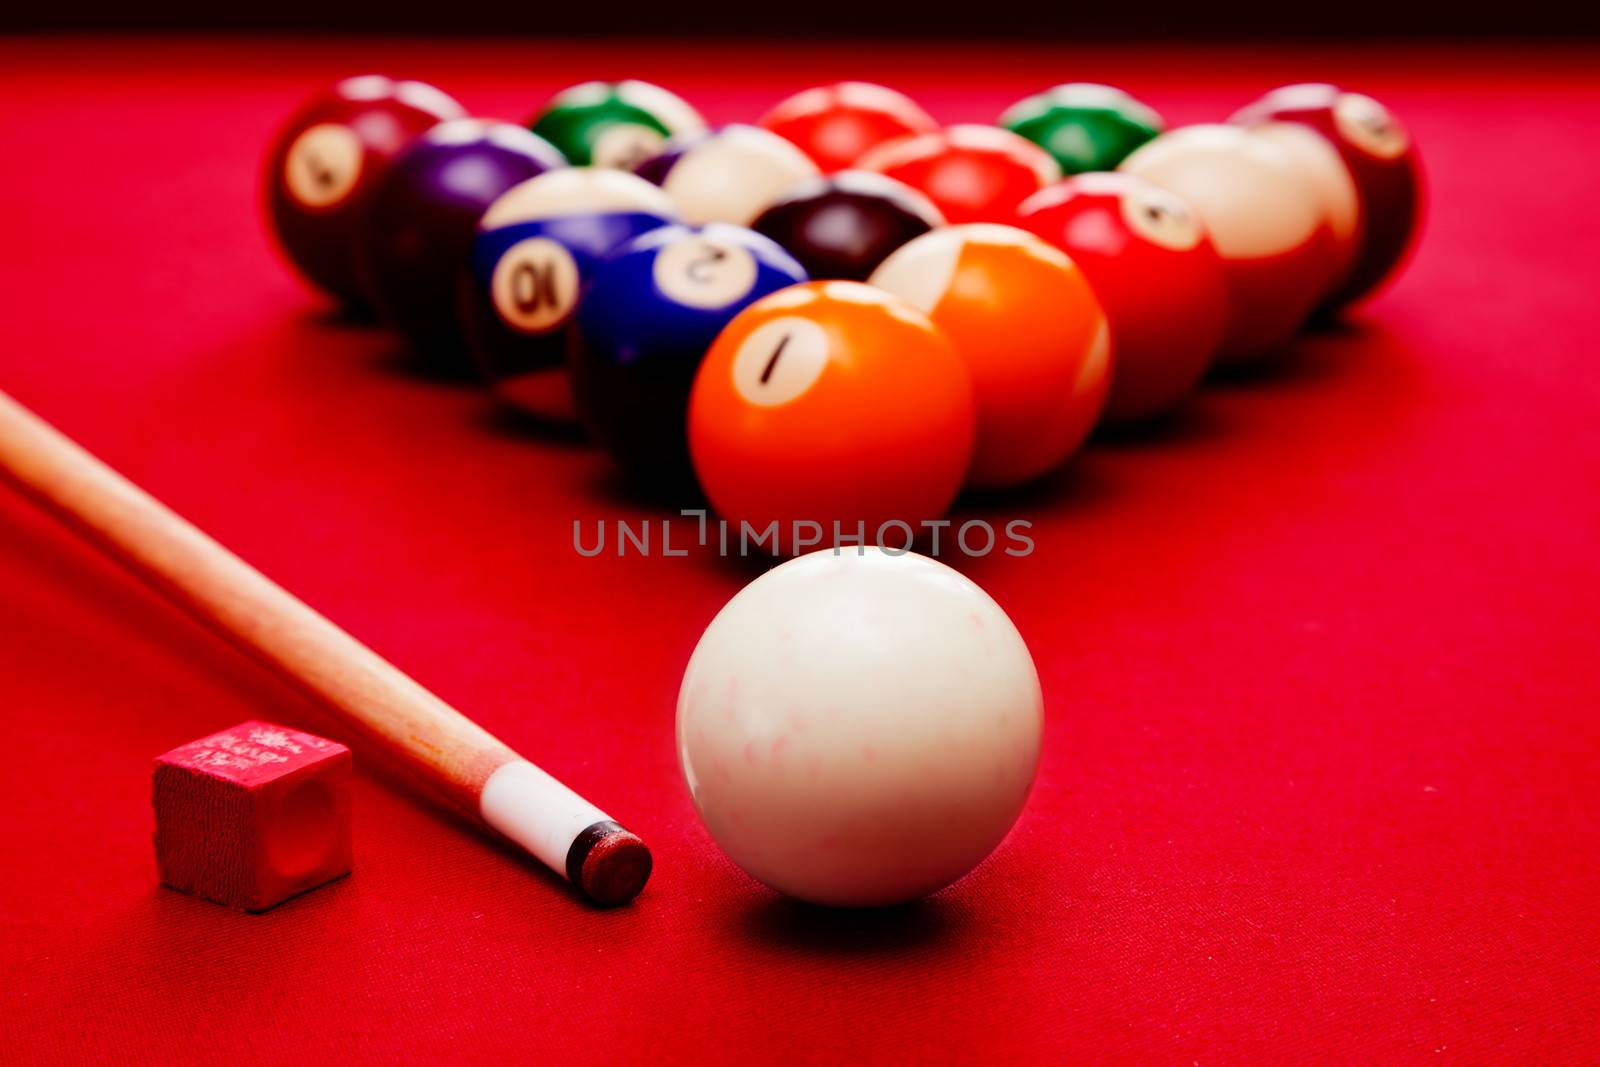 Billards pool game. Cue ball, cue, color balls in triangle, chalk. Red cloth table